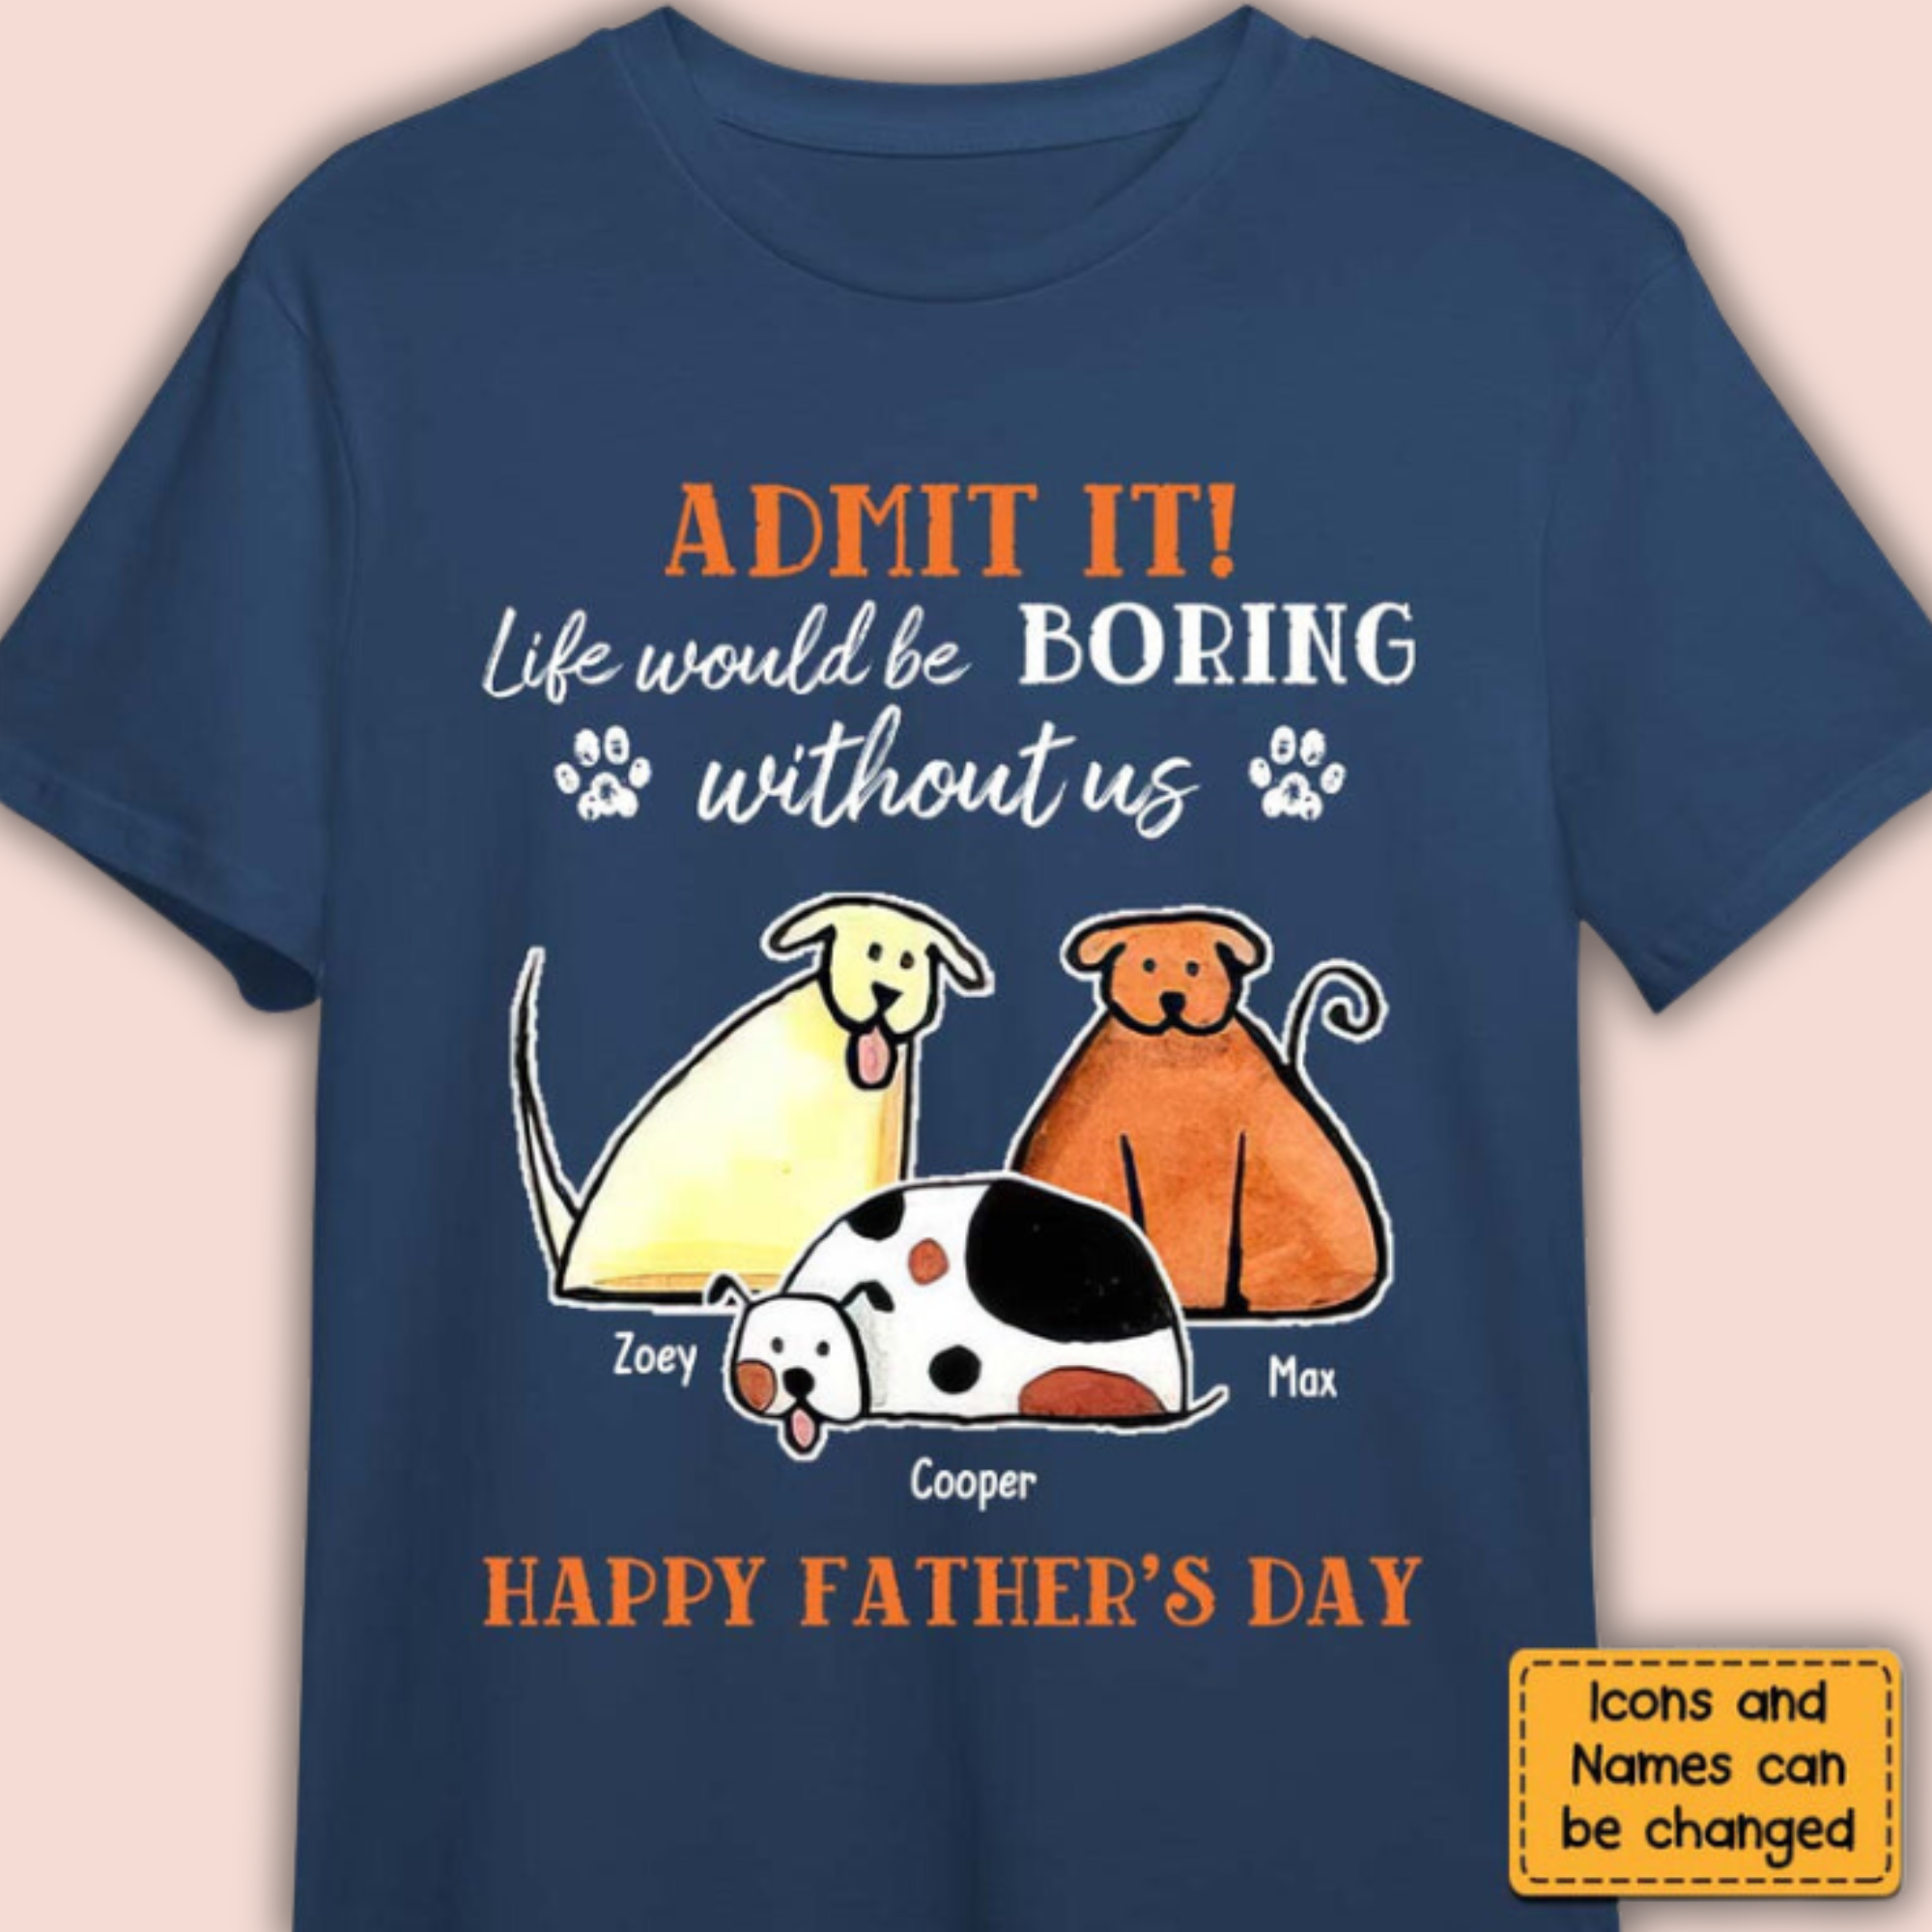 Pesonalized Admit It Life Would Be Boring Without Us T-Shirt / Hoodie / Sweatshirt Happy Father's Day Gift For Dad